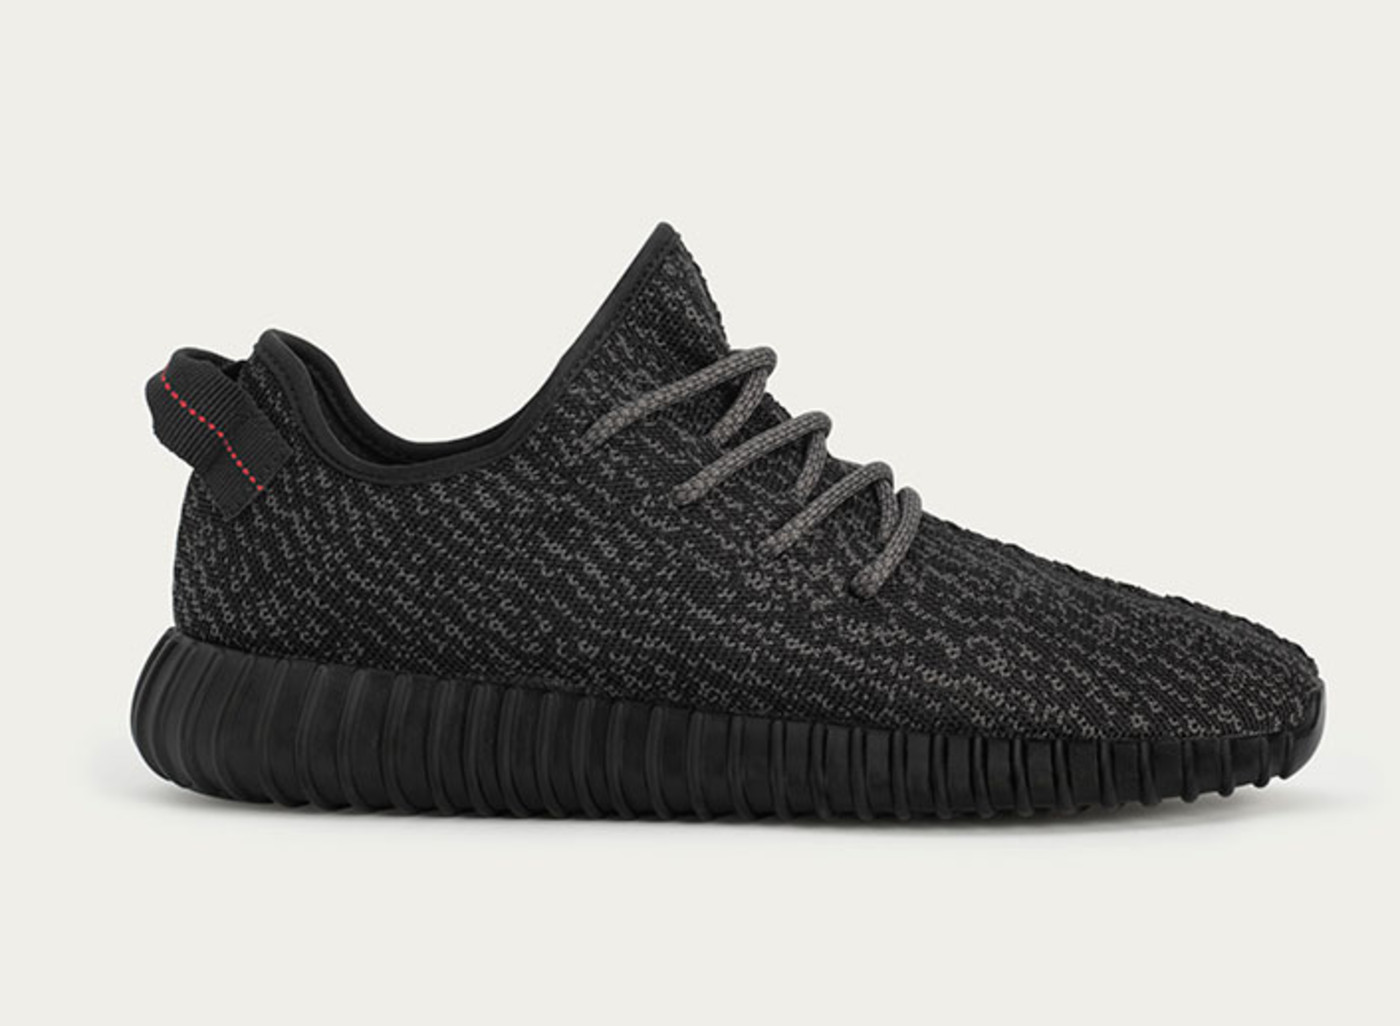 how hard is it to get yeezys on adidas confirmed